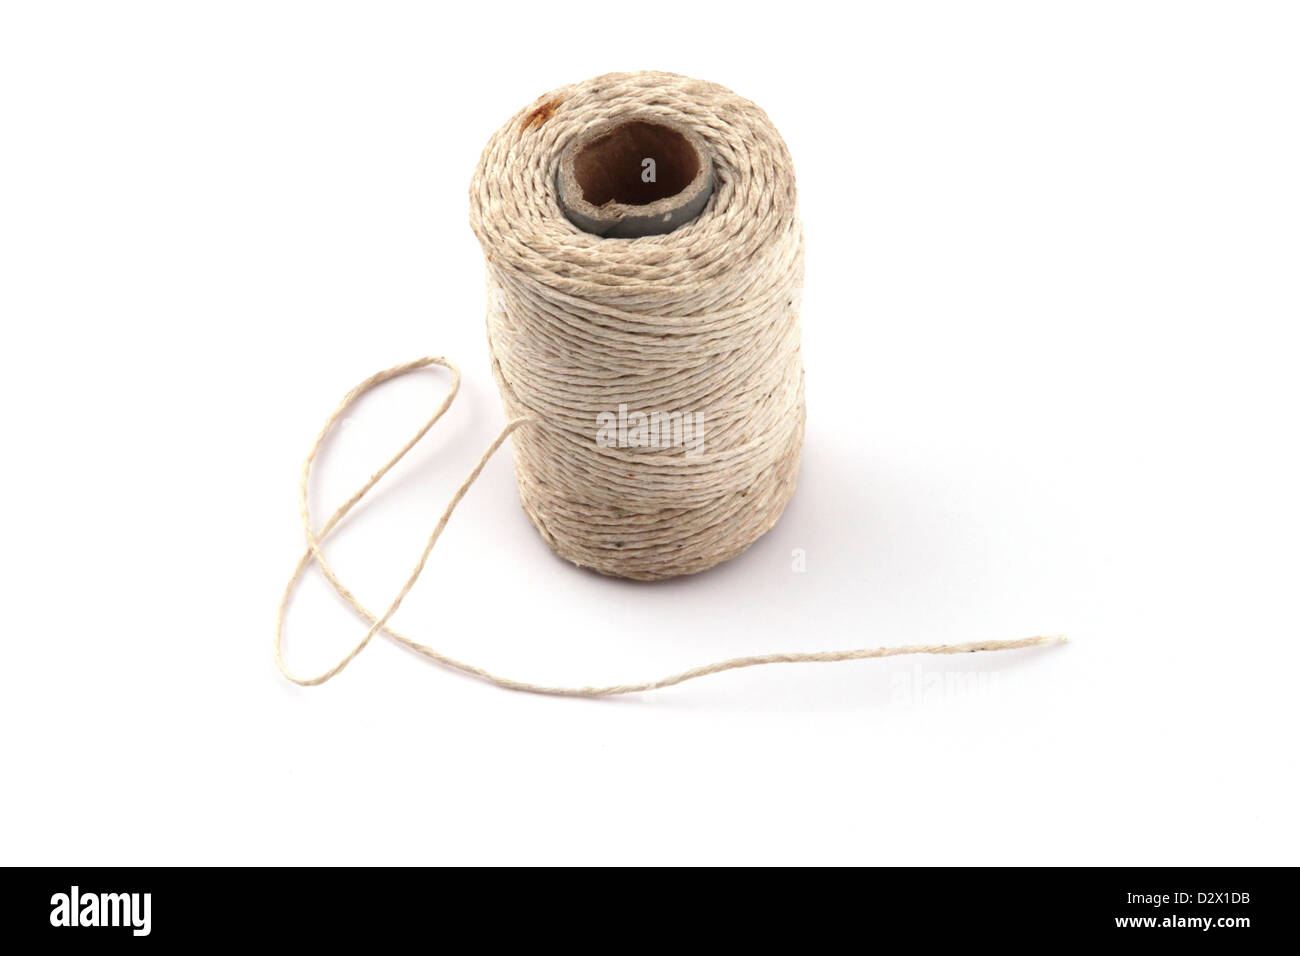 Ball of string or twine on a plain white background Stock Photo